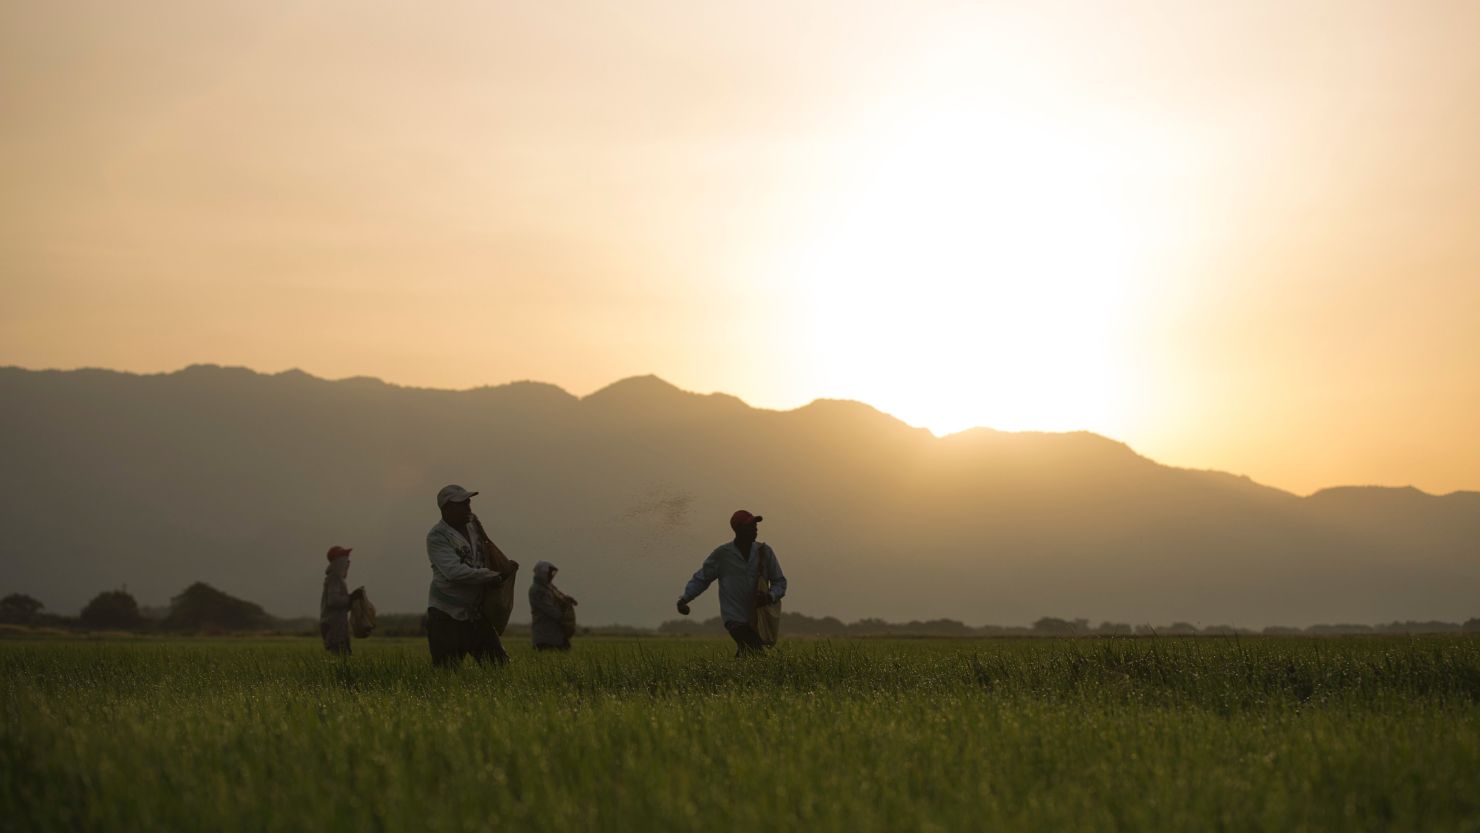 Haitian workers spread fertilizer on a rice field in Esperanza, Dominican Republic, in July 2015. Their children were born in the Dominican Republic and are citizens, though civil rights groups say the government discriminates against both parents and their Dominican-born children. 